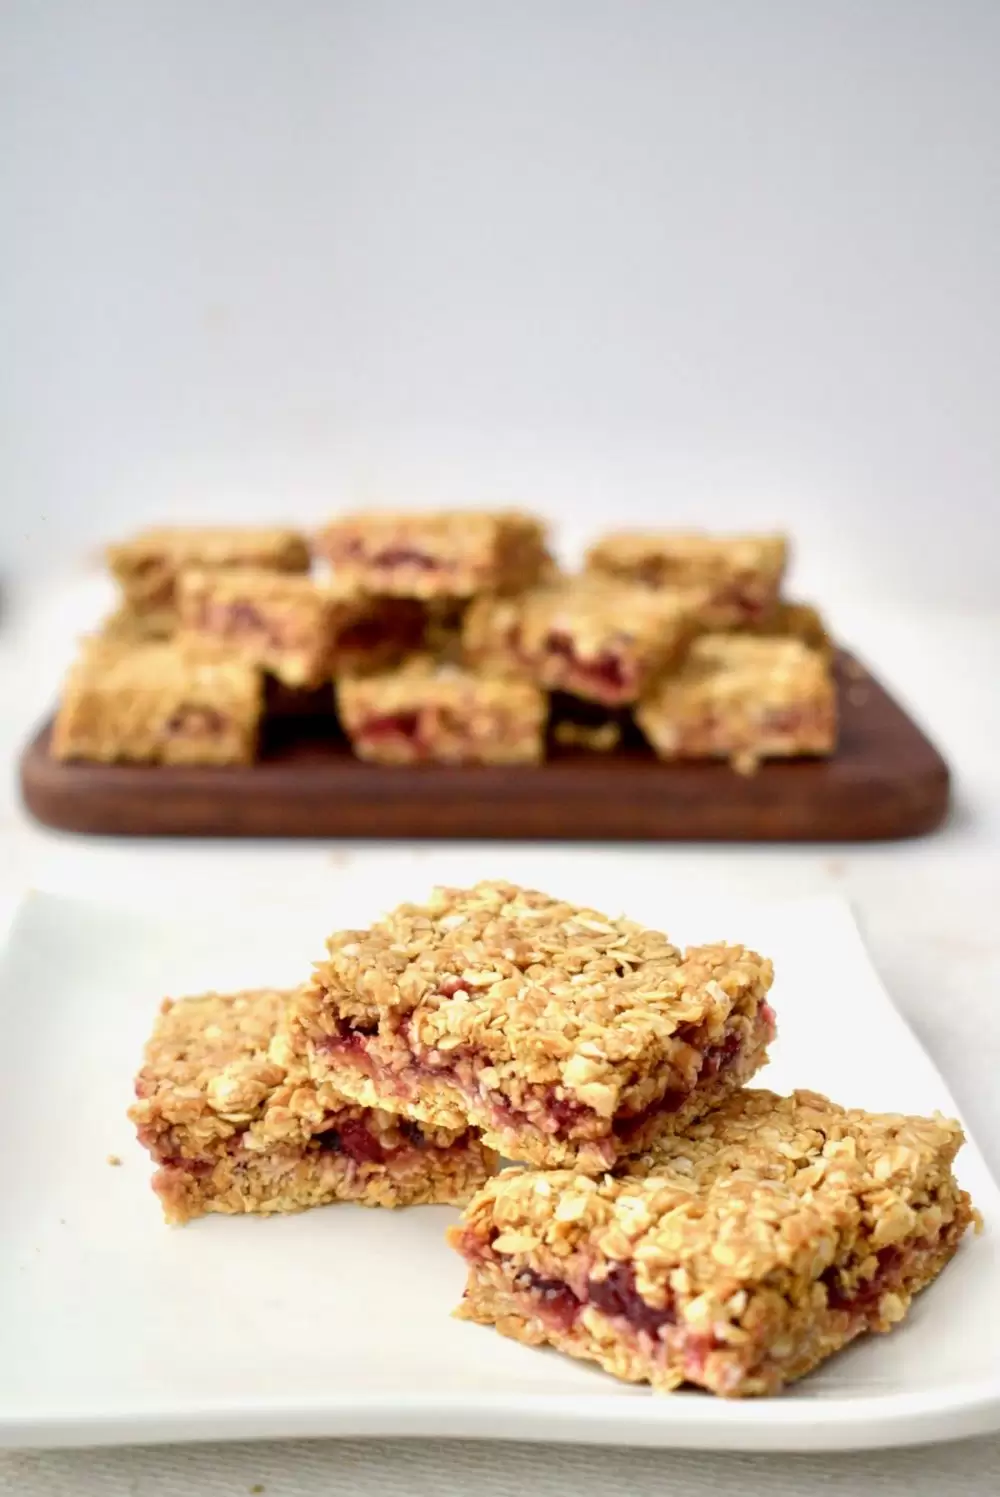 Three vegan oat bars on a plate, with the remaining bars in the background